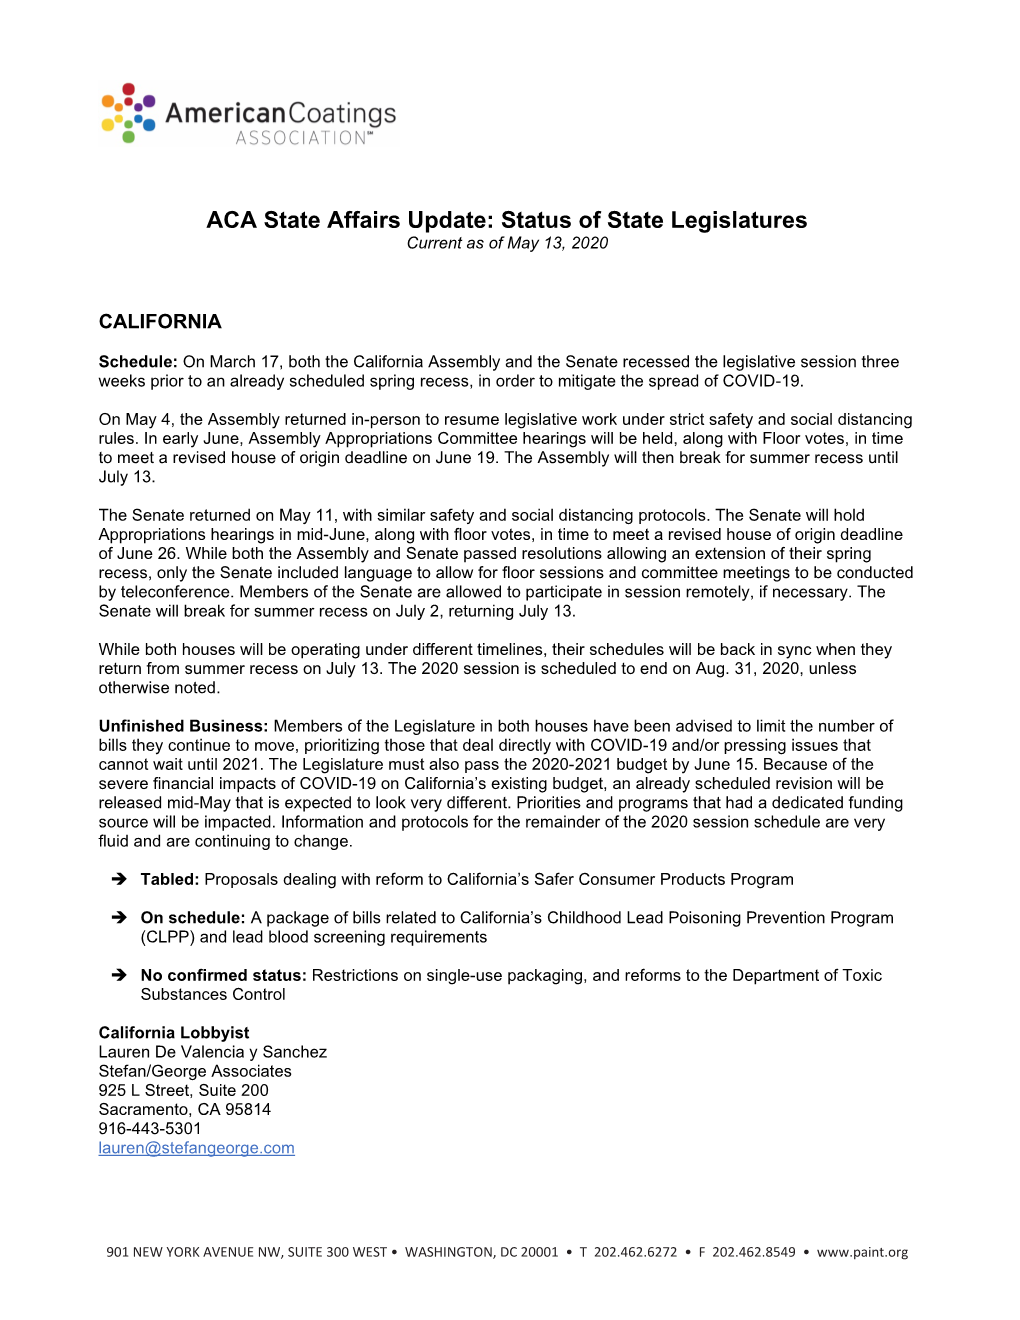 ACA State Affairs Update: Status of State Legislatures Current As of May 13, 2020